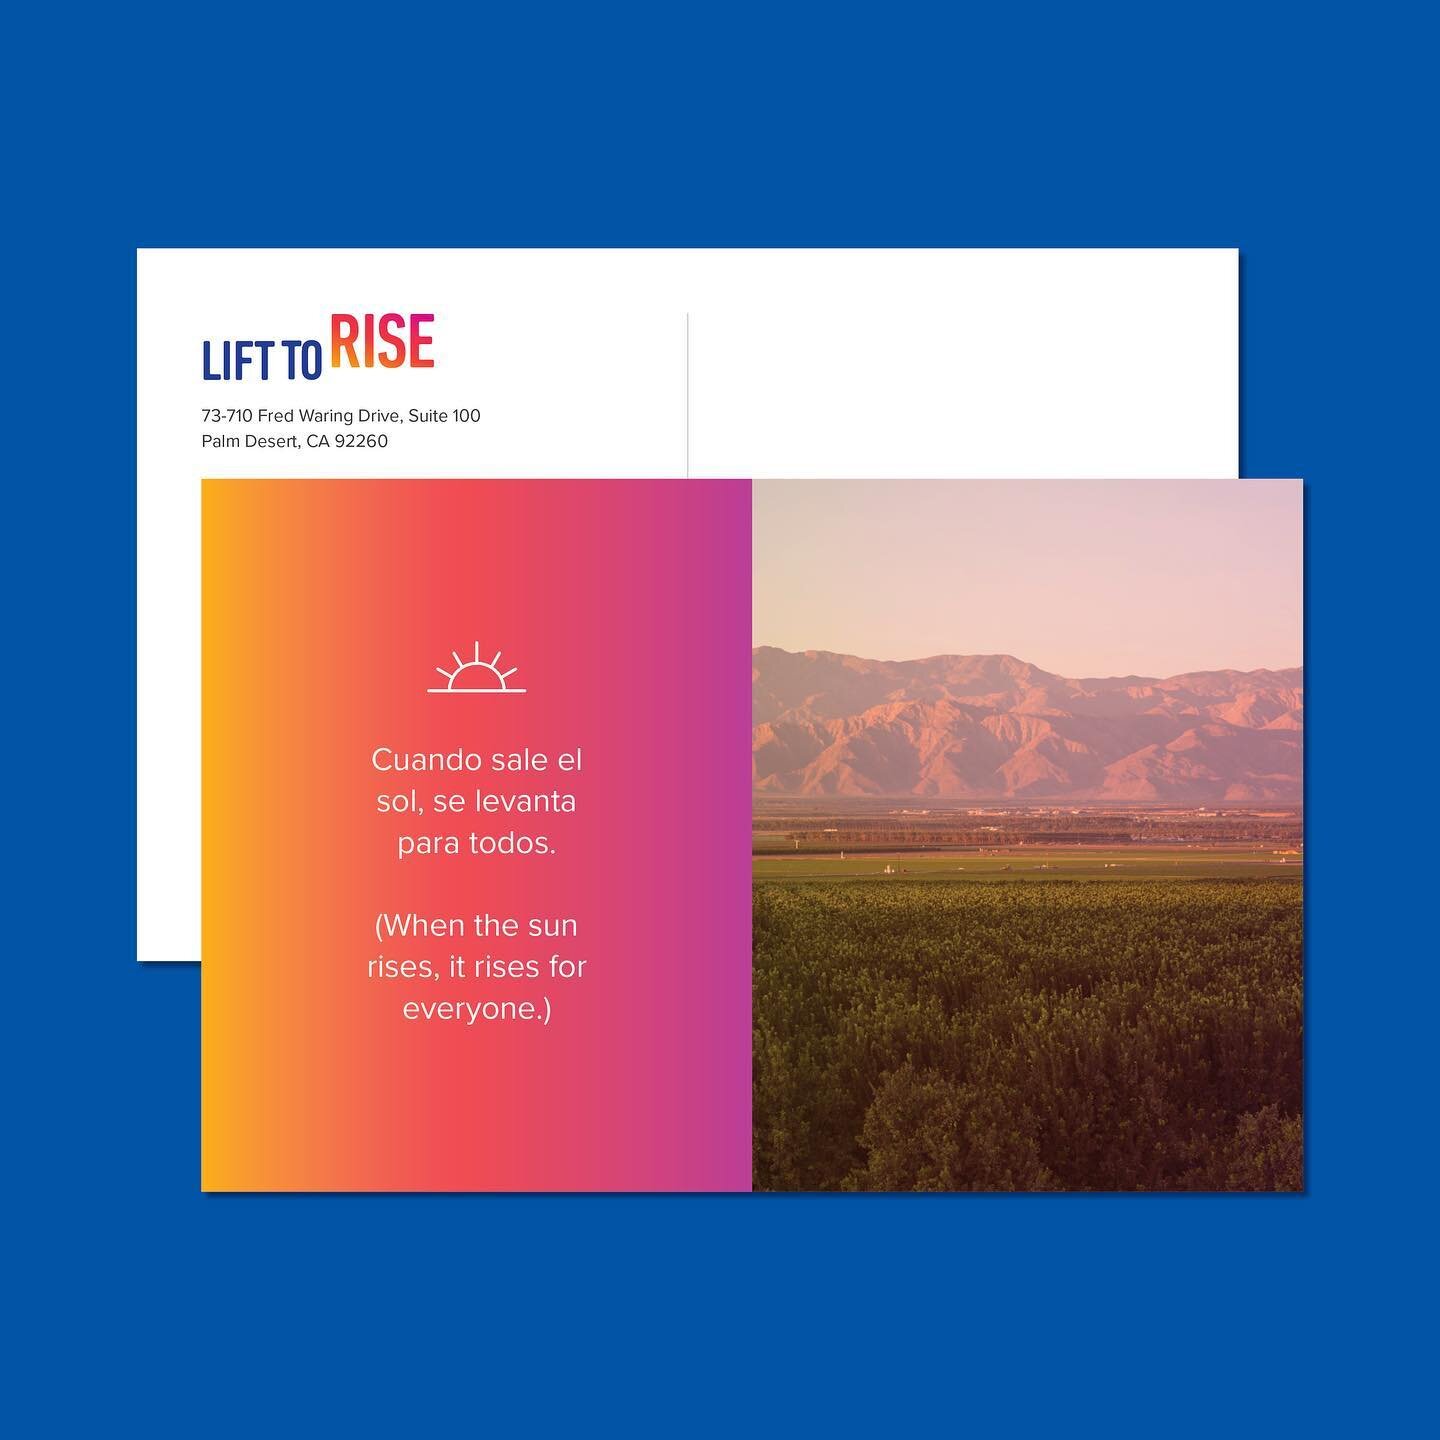 Lift to Rise (@lifttorise) is a wonderful org that focuses on serving the needs of Coachella Valley residents. This year, they have done an incredible amount of work providing rental assistance to residents impacted by COVID and connecting people wit